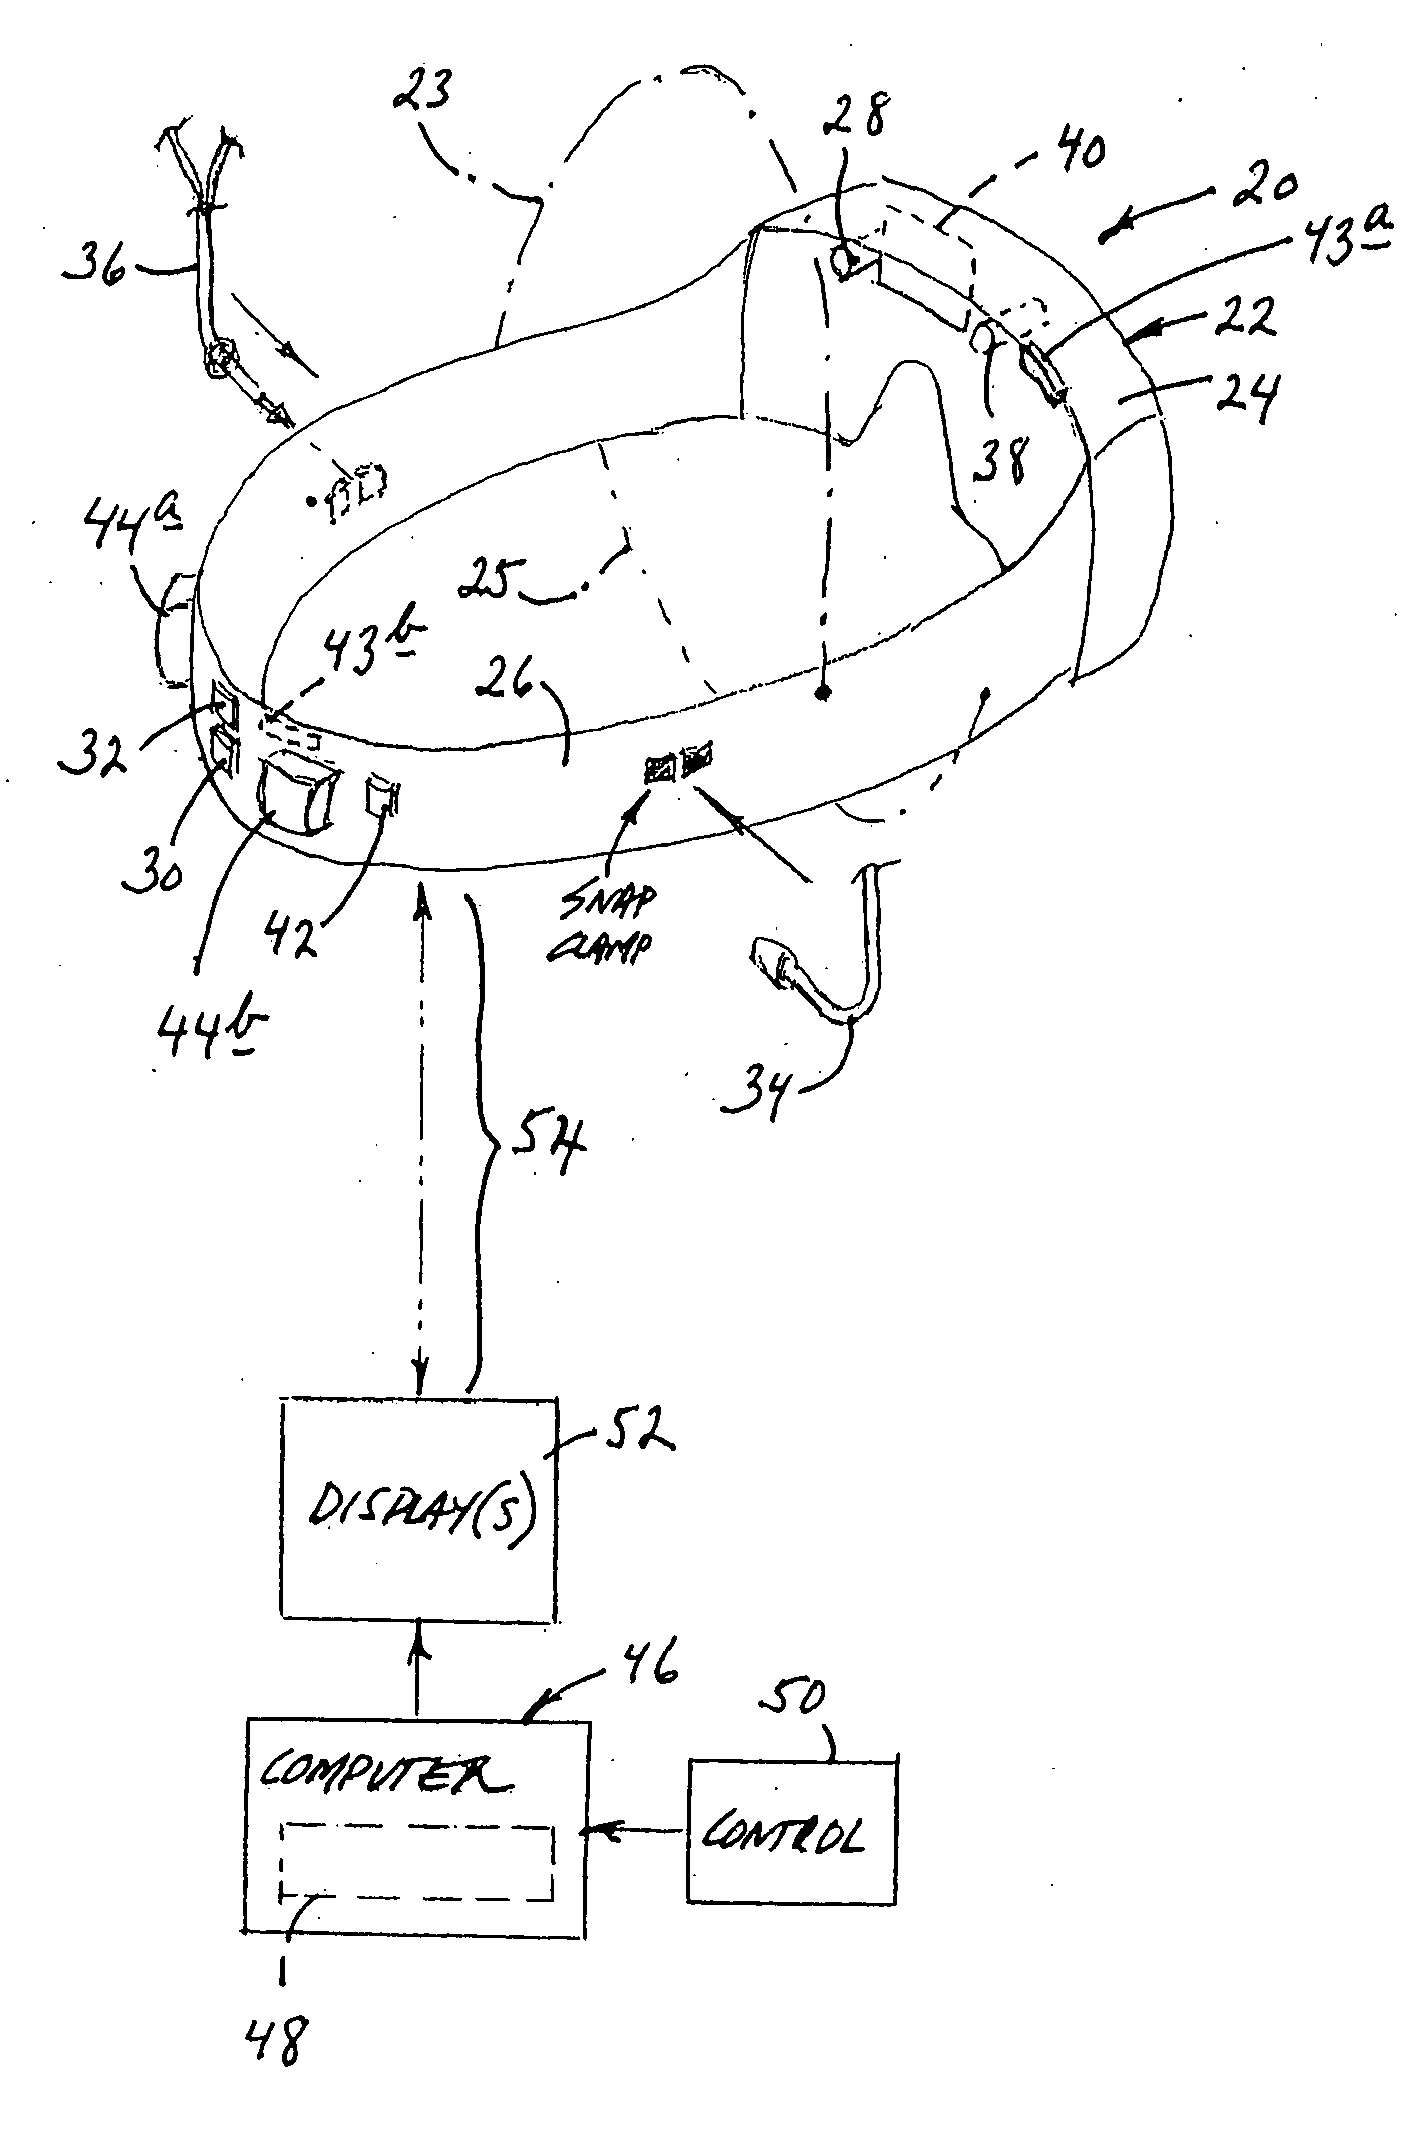 Head-stabilized medical apparatus, system and methodology